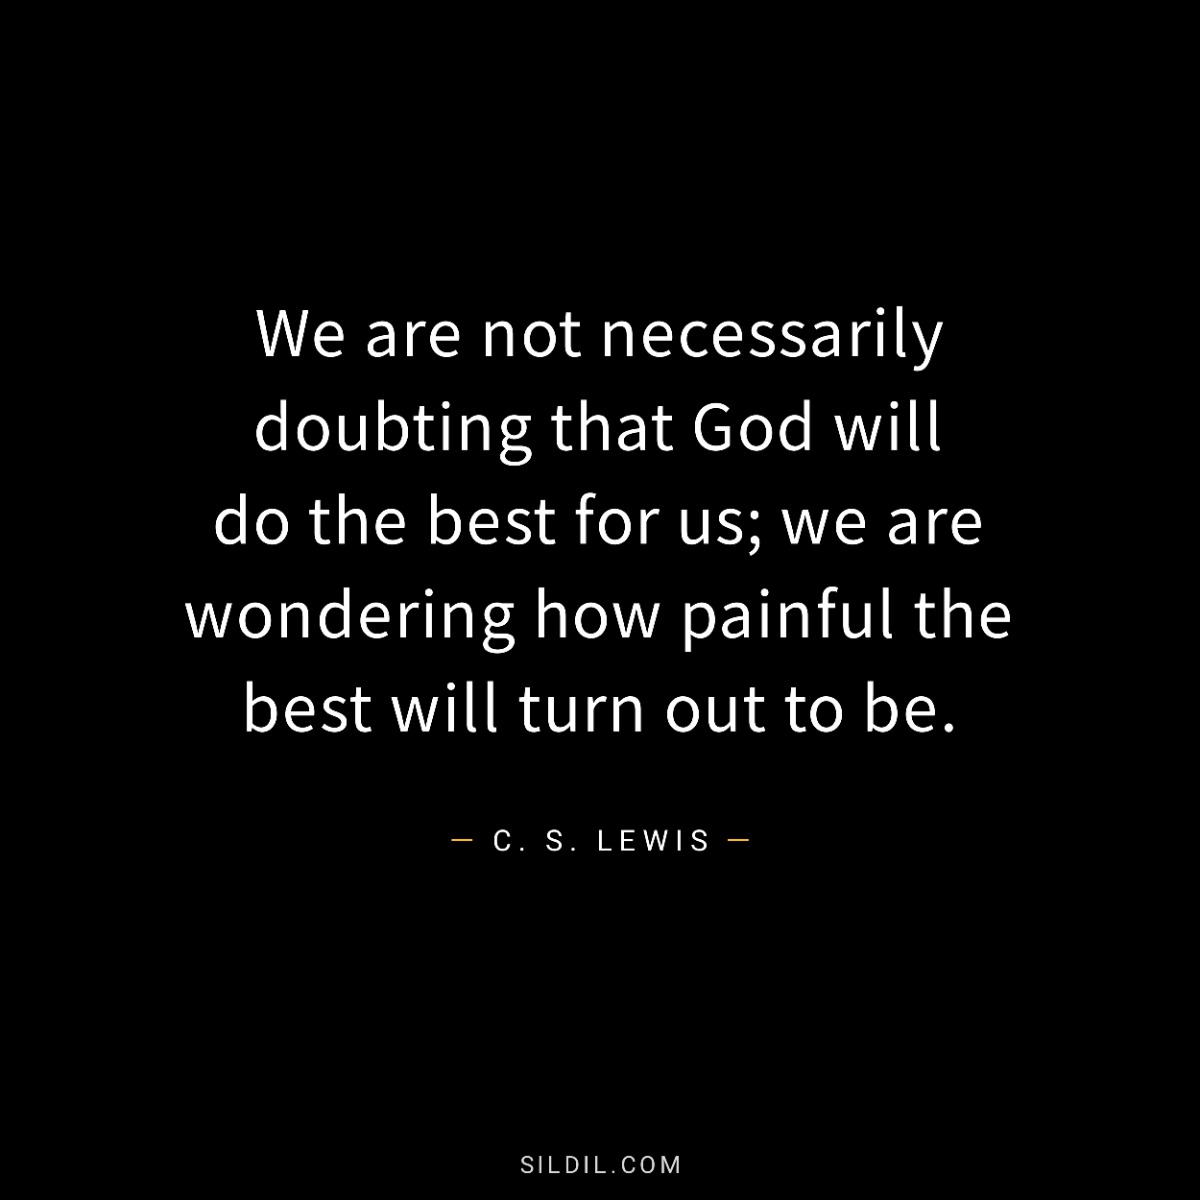 We are not necessarily doubting that God will do the best for us; we are wondering how painful the best will turn out to be.